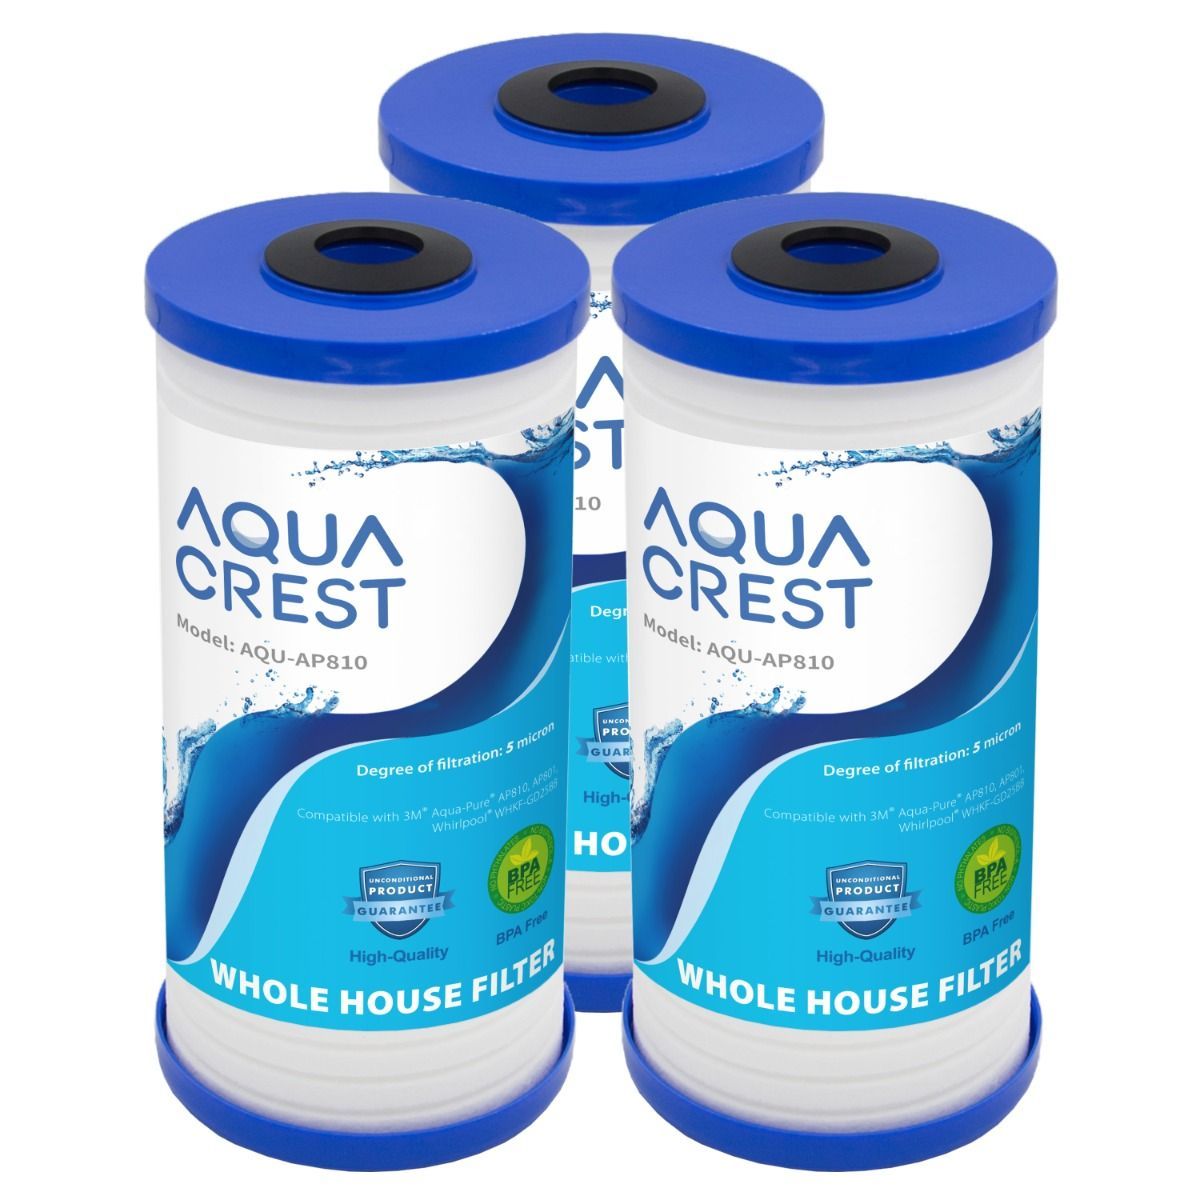 AP801 Whirlpool WHKF-GD25BB AQUACREST AP810 Whole House Water Filter Pack of 4 Replacement for 3M Aqua-Pure AP810 AP811 